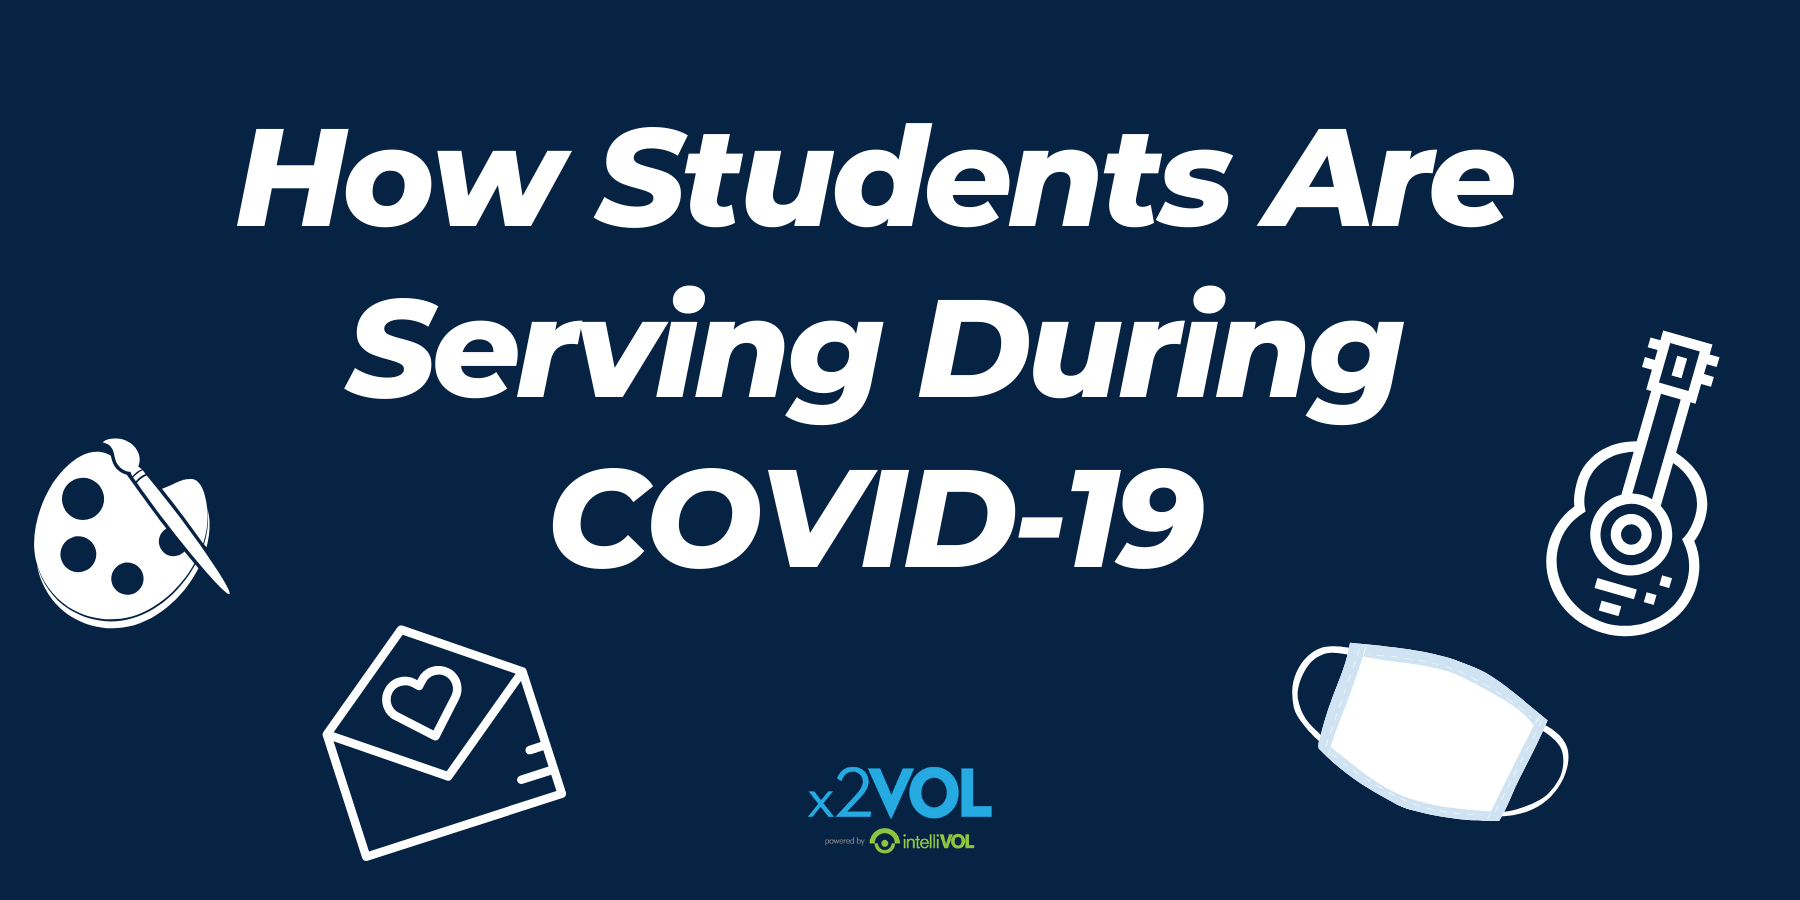 How Students are Serving During COVID-19